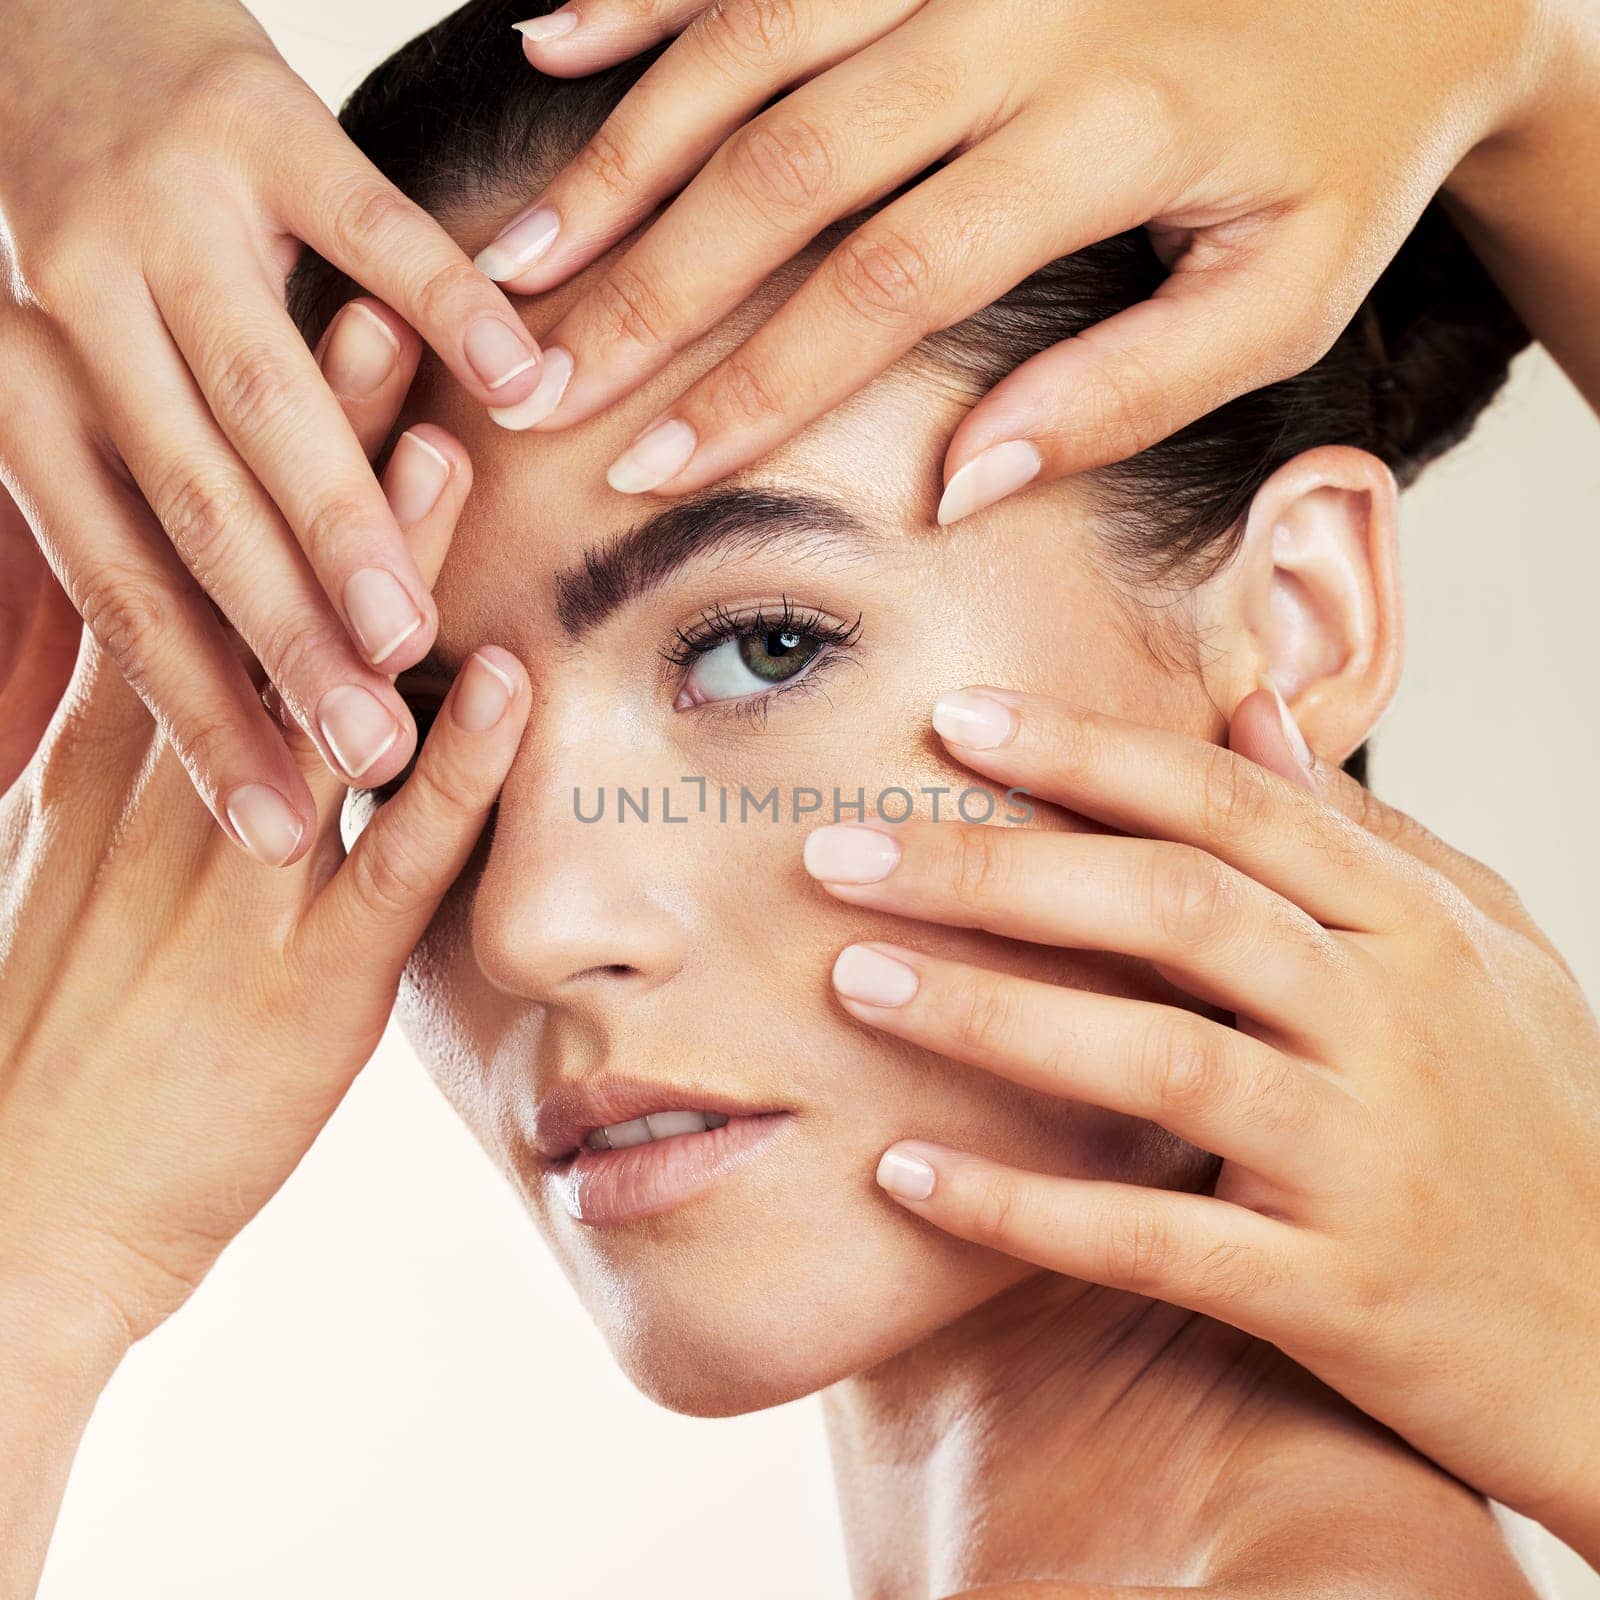 Skincare, beauty and hands on face of woman portrait in studio with natural makeup or cosmetics. Aesthetic model person for facial wellness and dermatology for skin glow, salon or spa manicure.